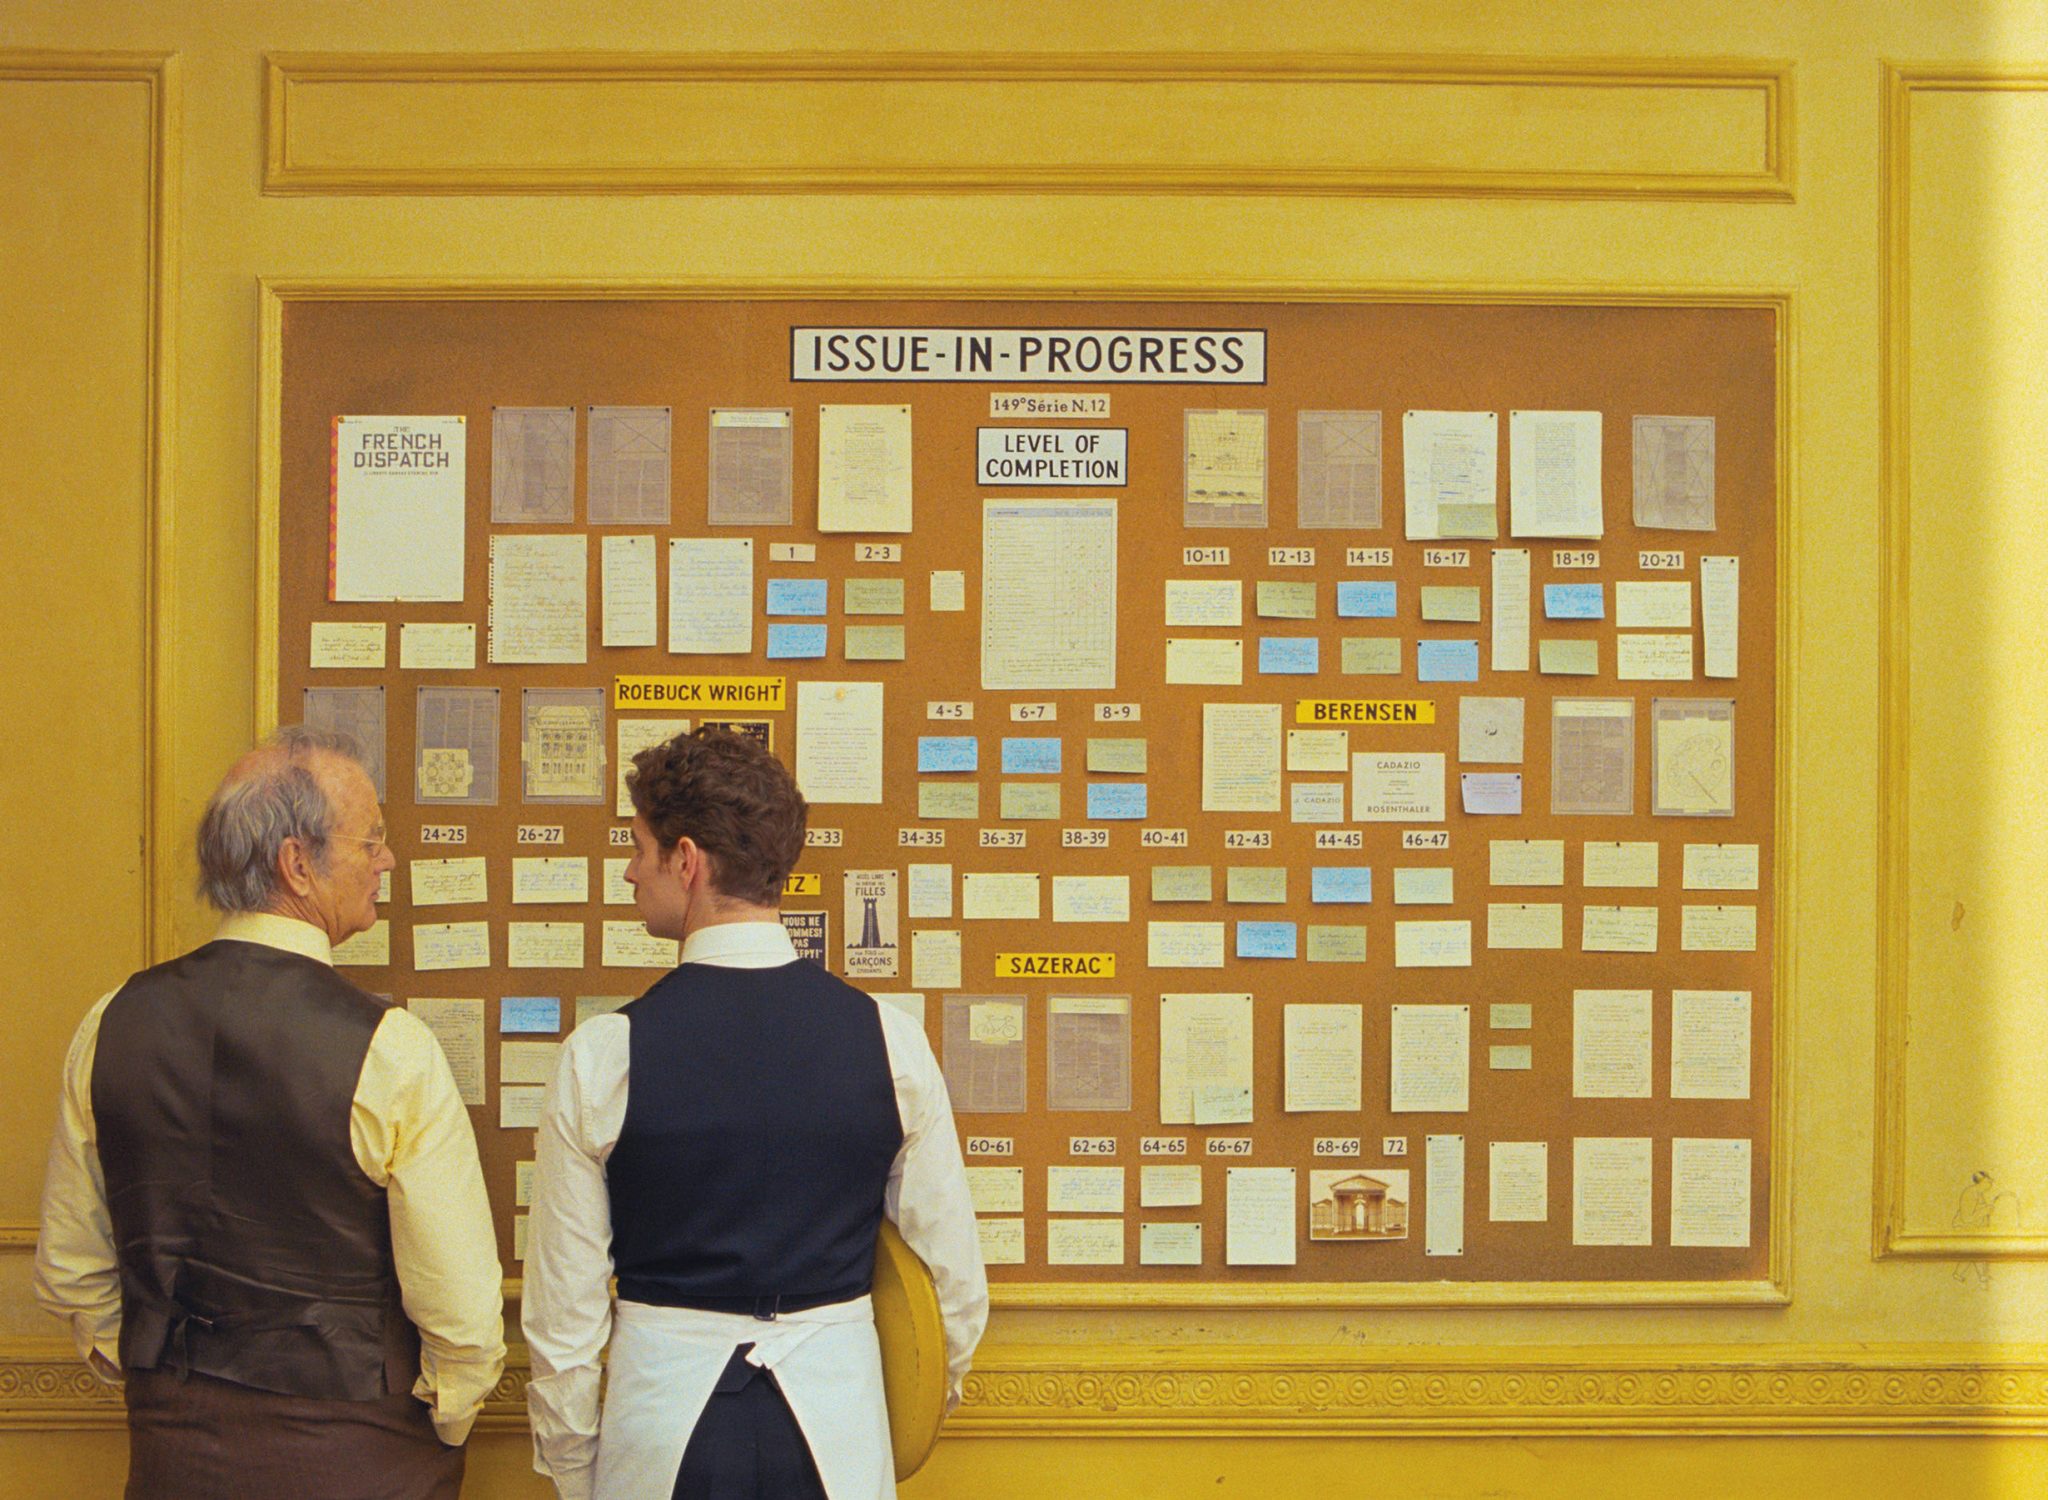 Why I Hate Wes Anderson